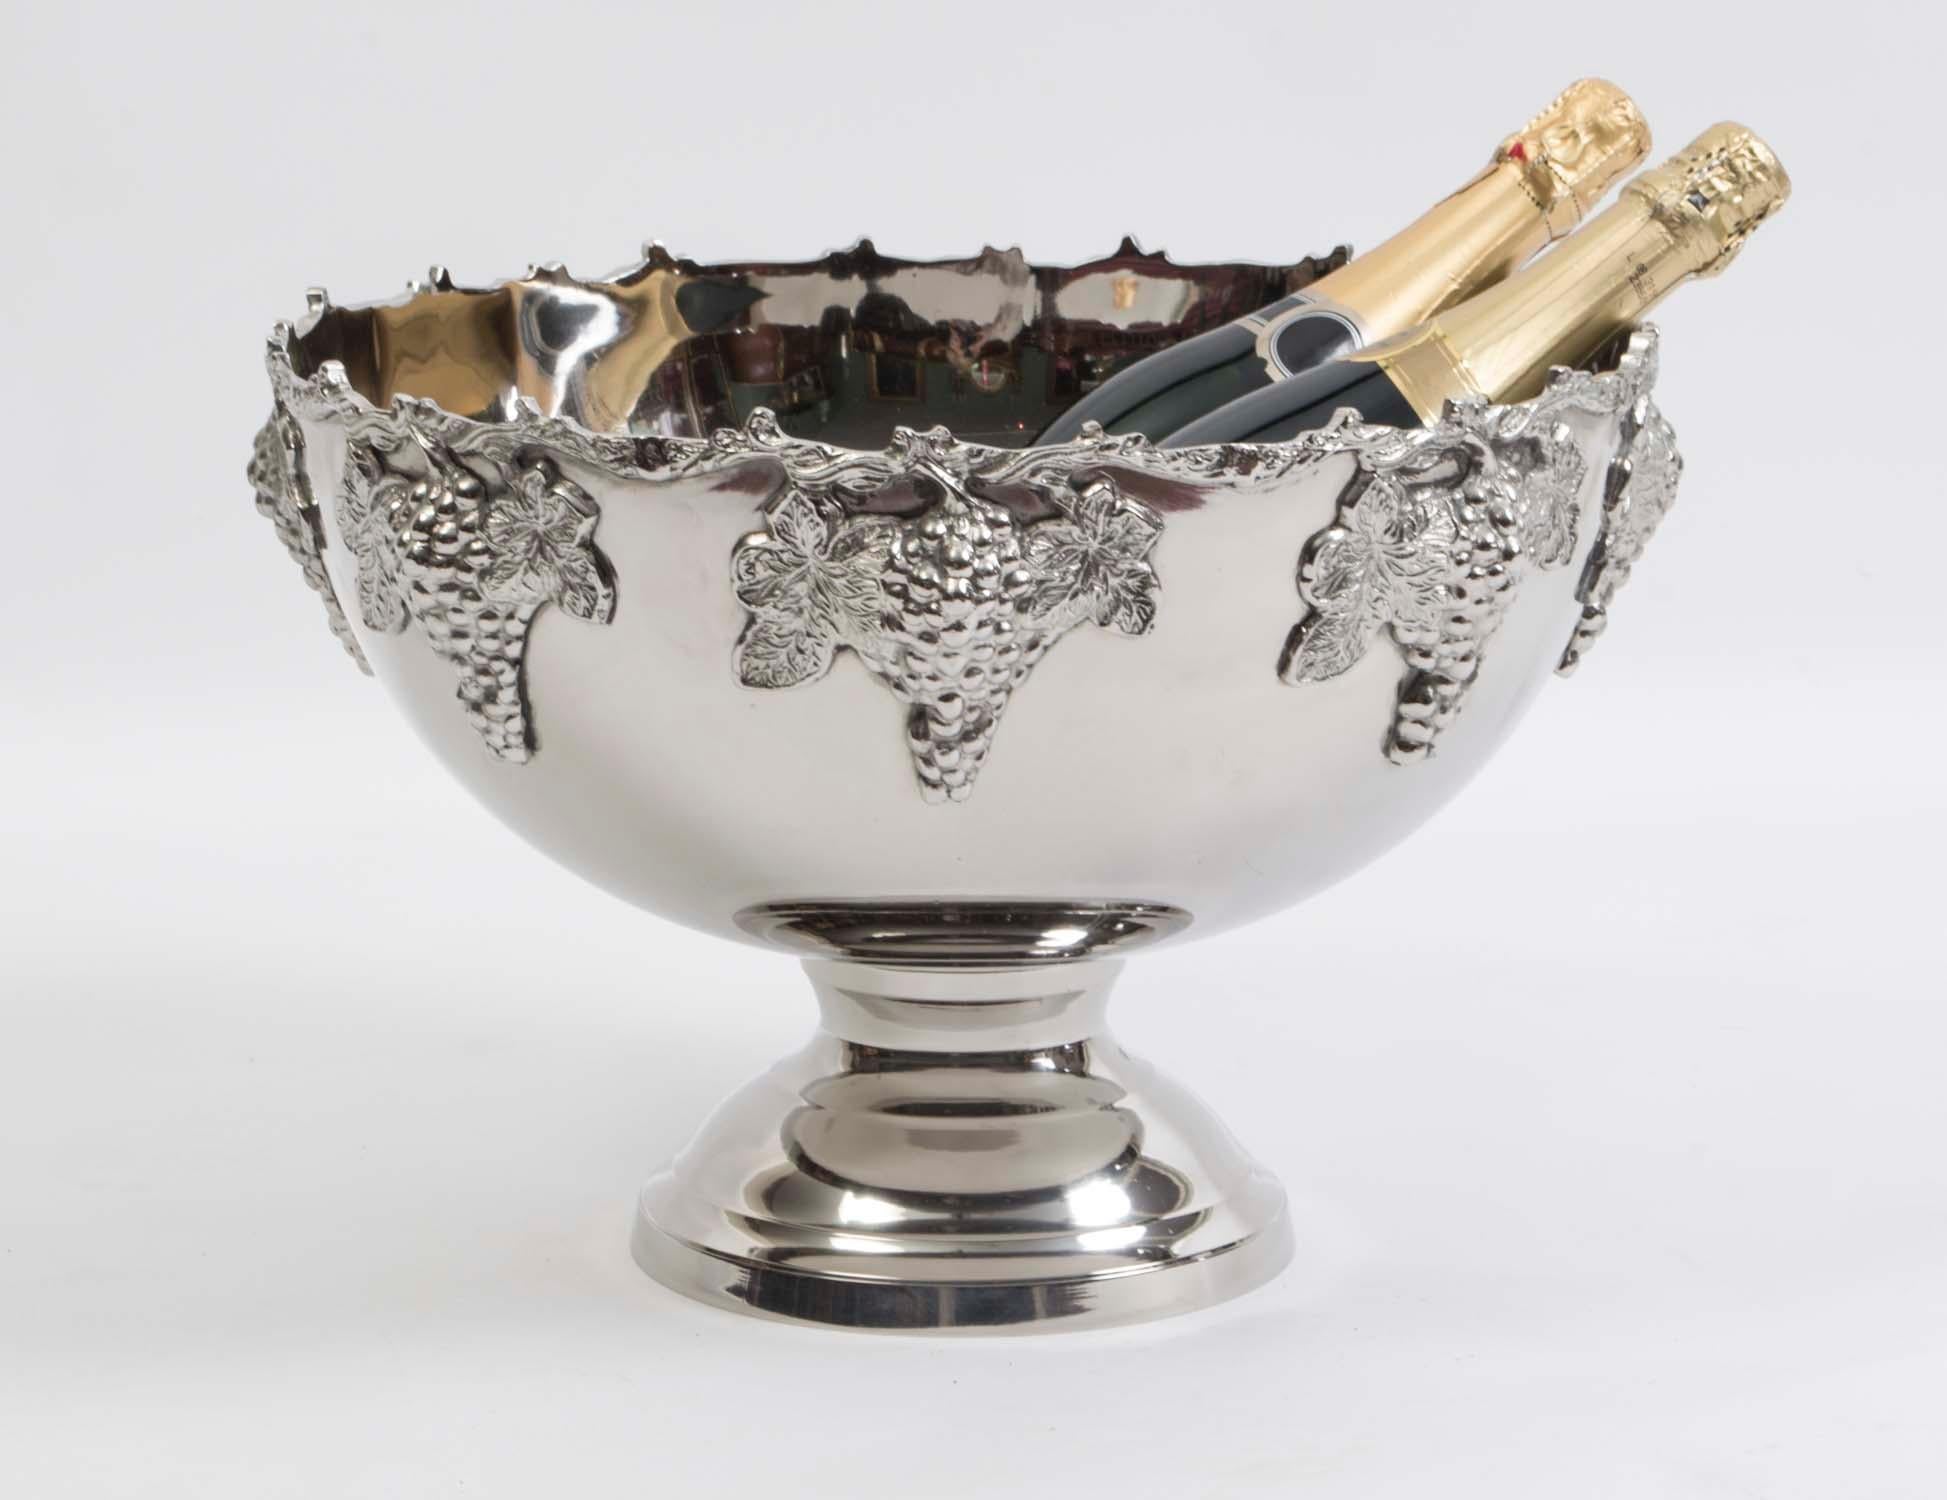 Vintage Silver Plated Monteith Punch Bowl Champagne Cooler 20th Century For Sale 5